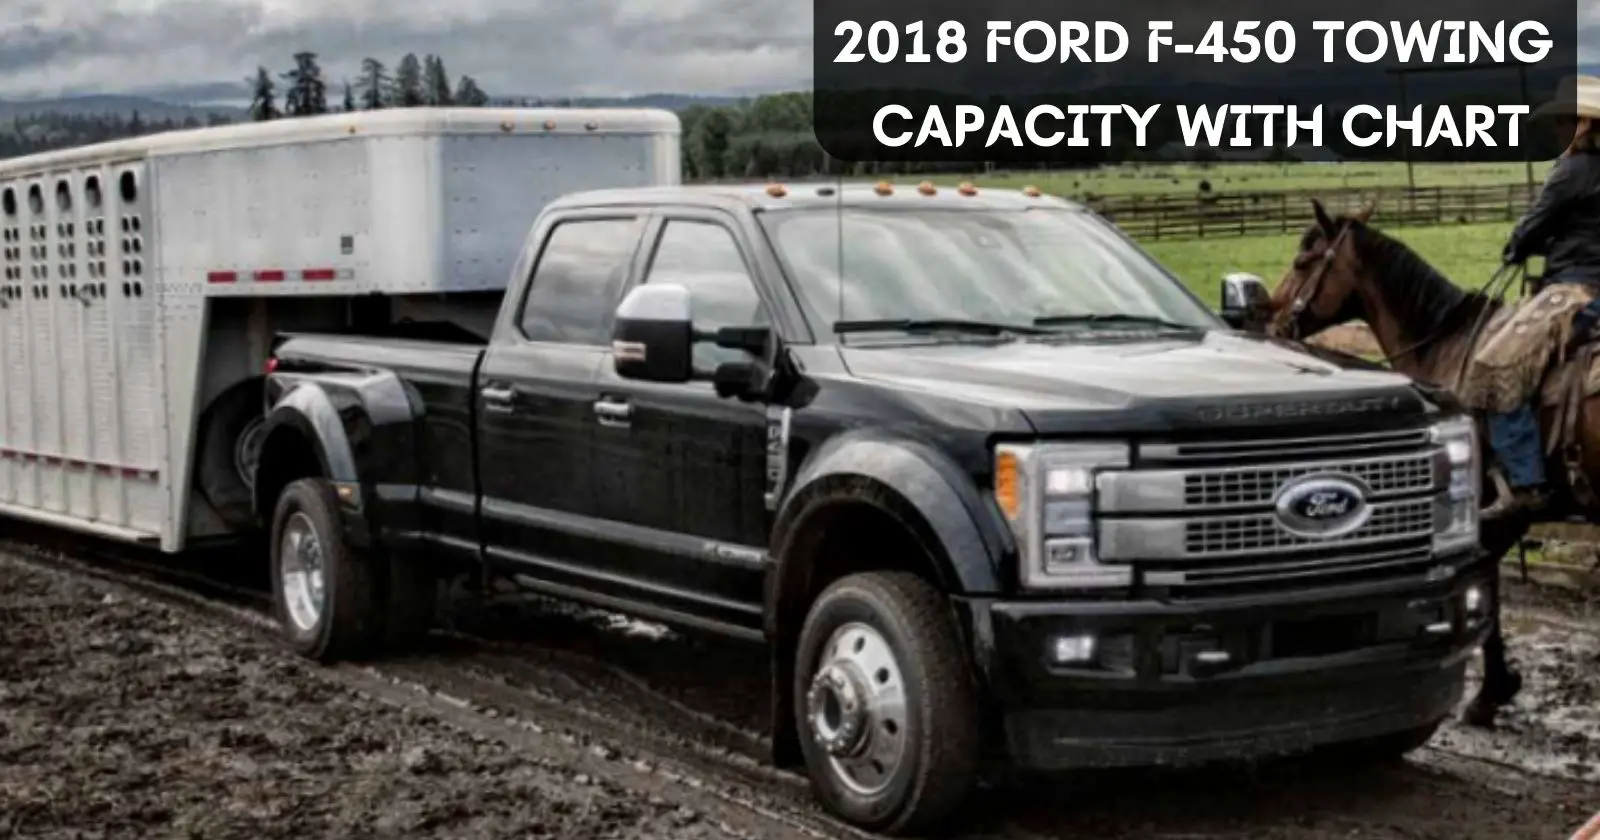 2018-ford-f-450-towing-capacity-with-chart-thecartowing